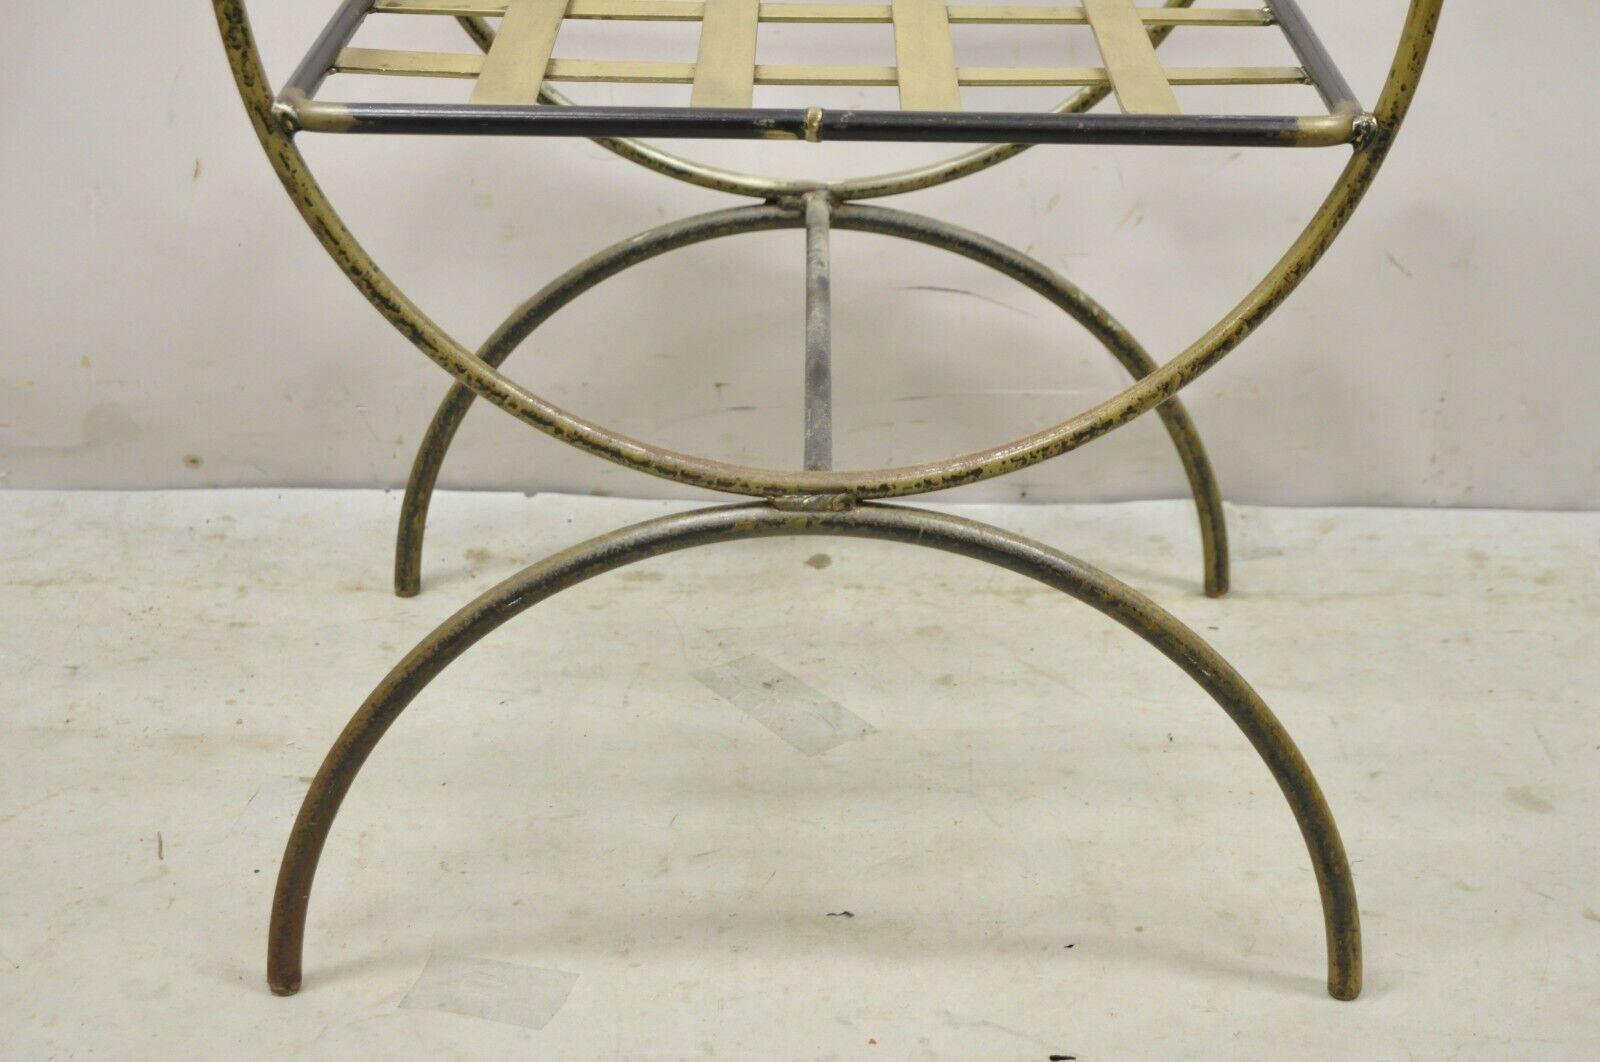 Vintage Neoclassical Style Curule Savonarola Wrought Iron Bench For Sale 3